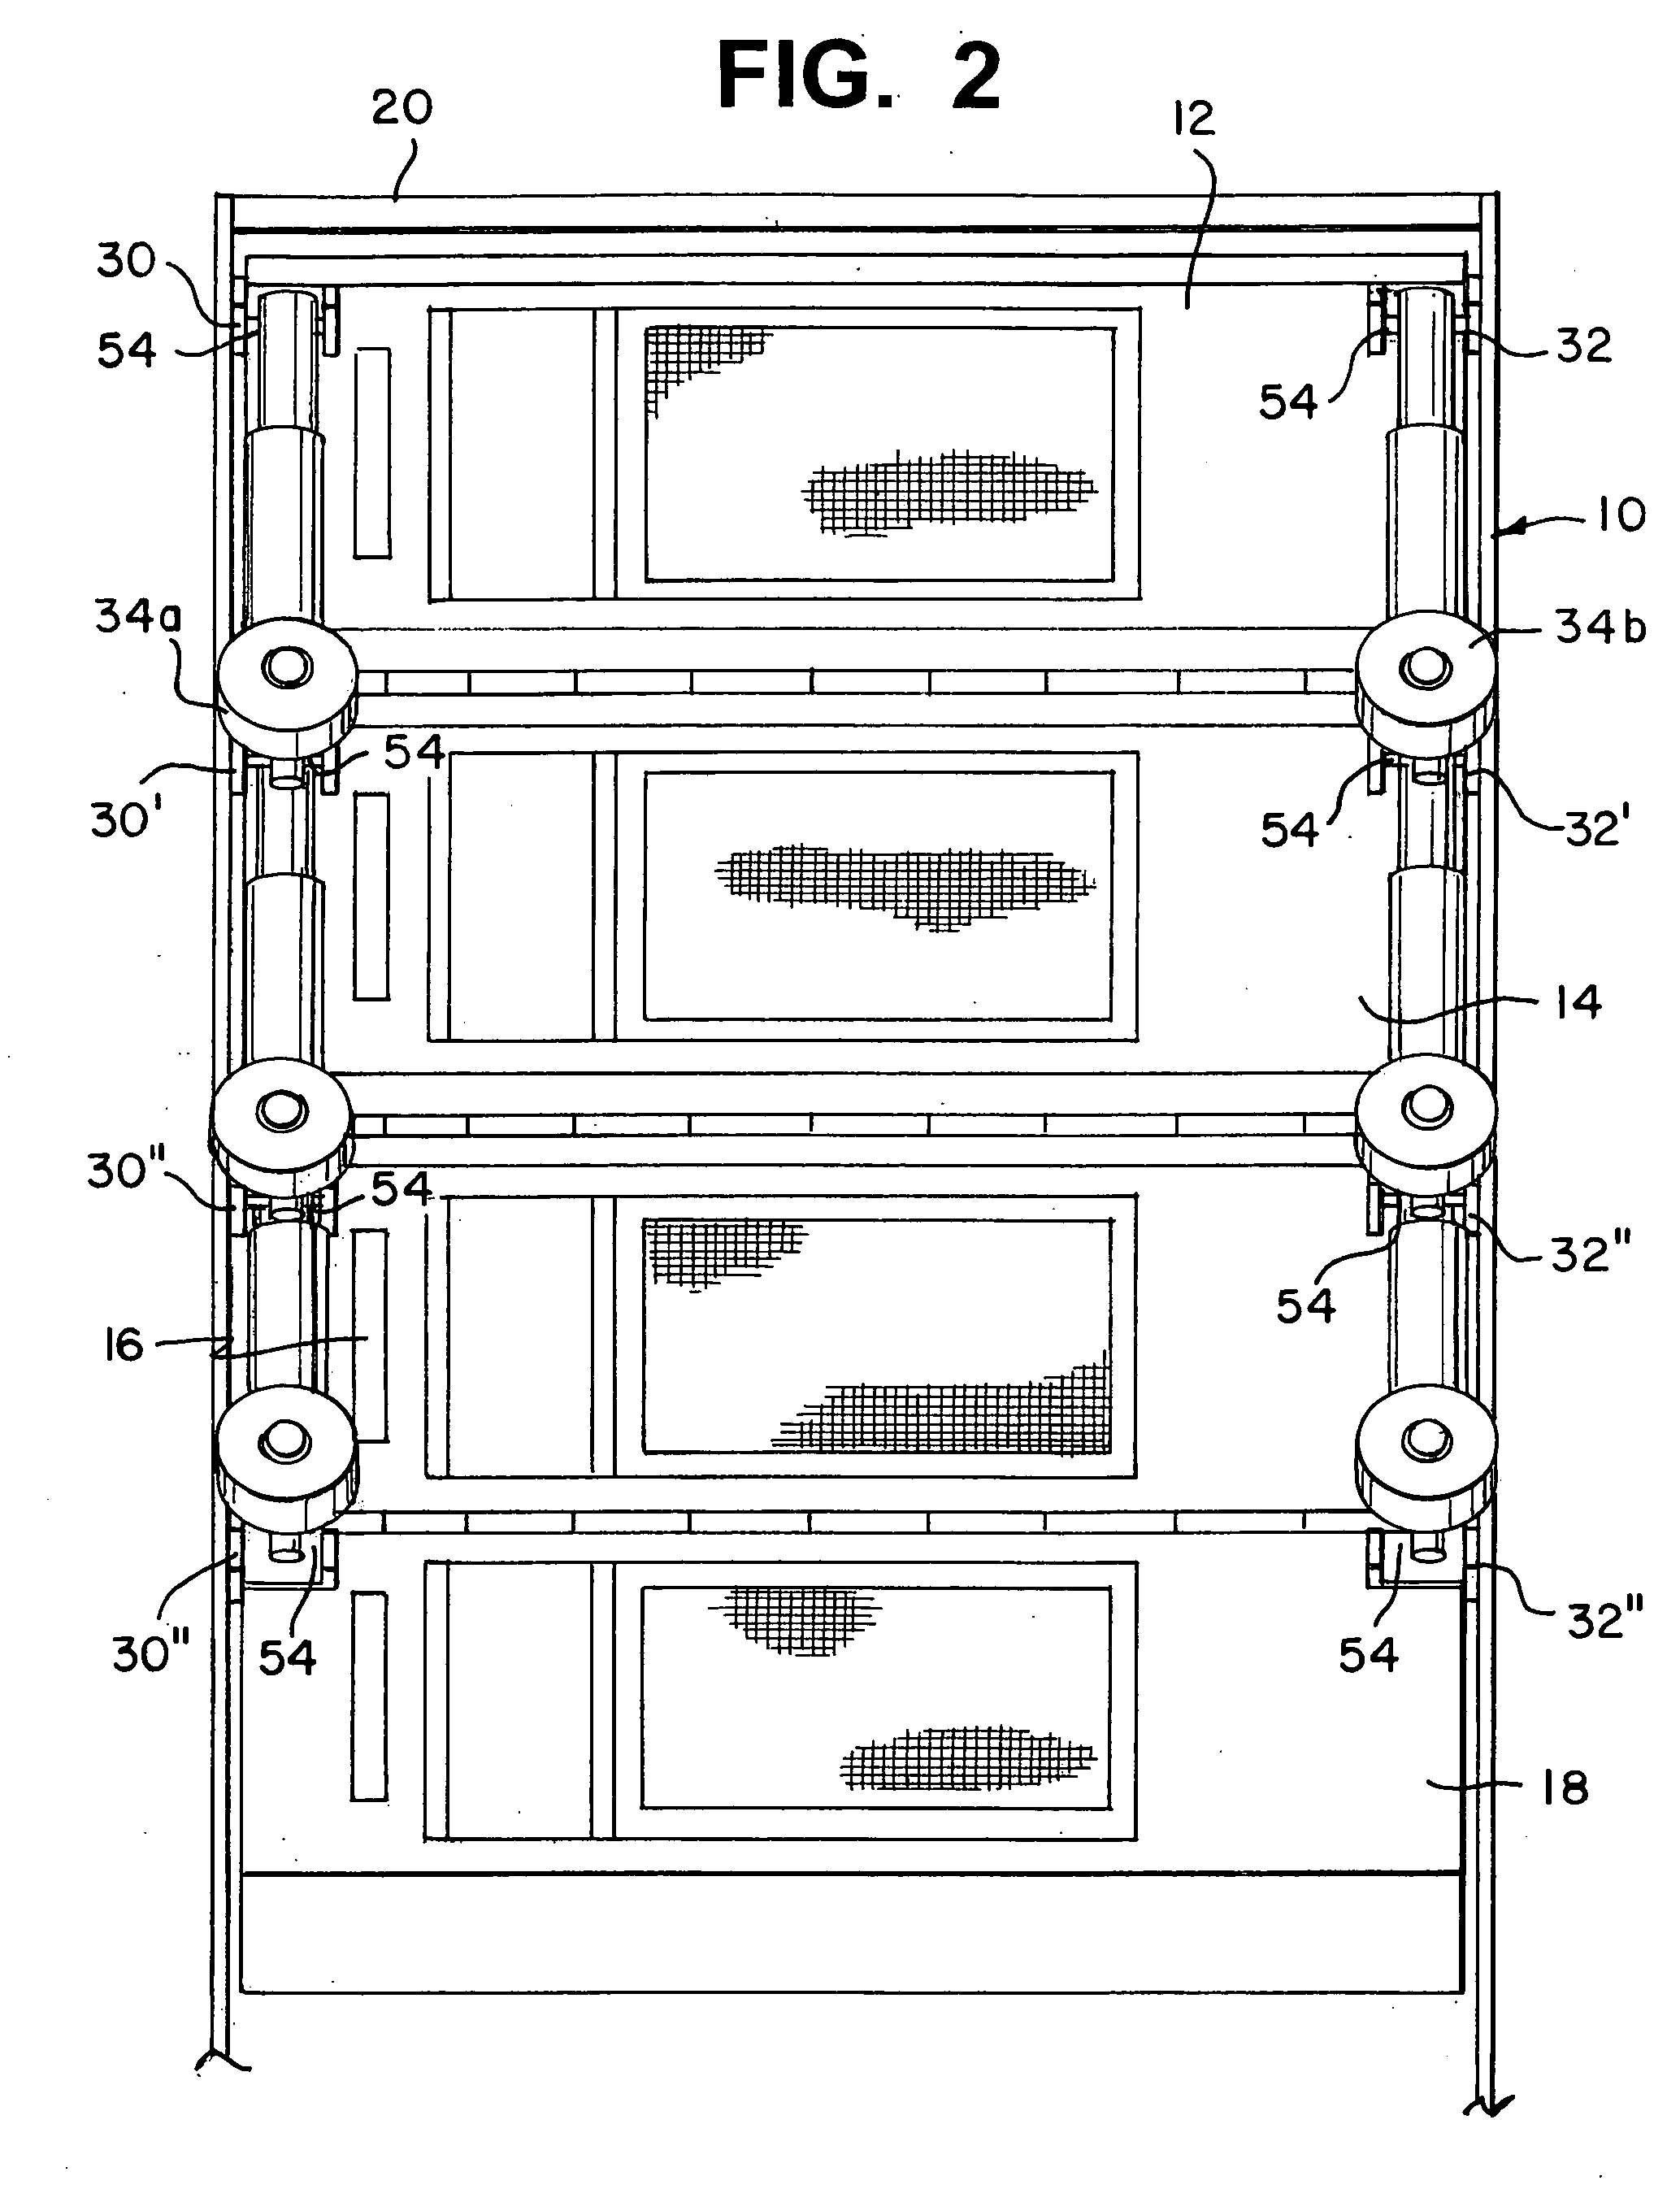 Automated system for adjusting line array speakers